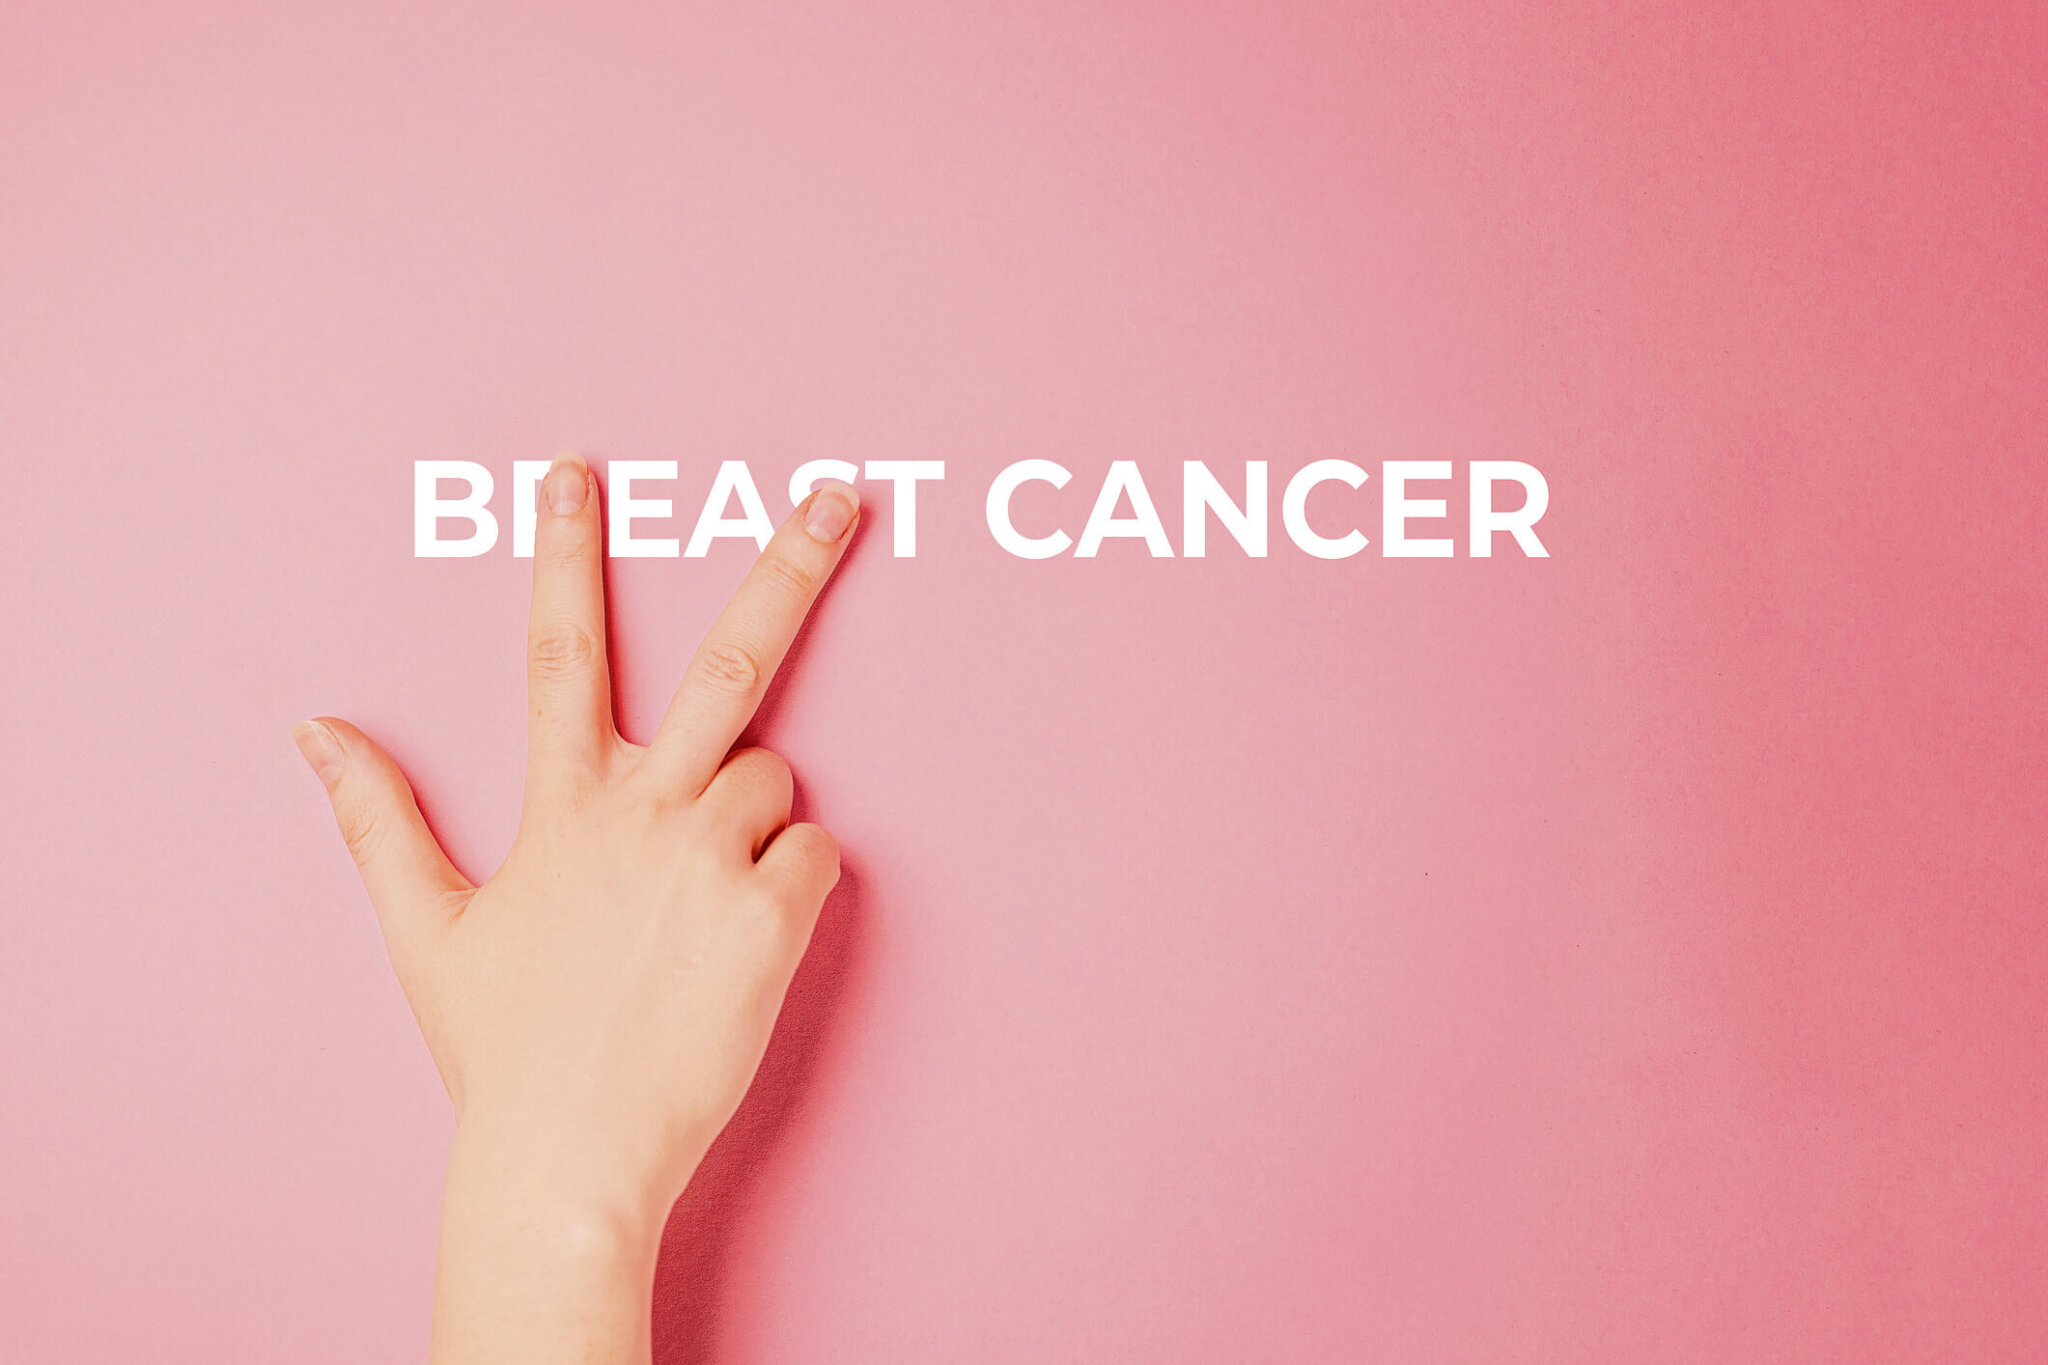 Beat Cancer breast cancer awareness month